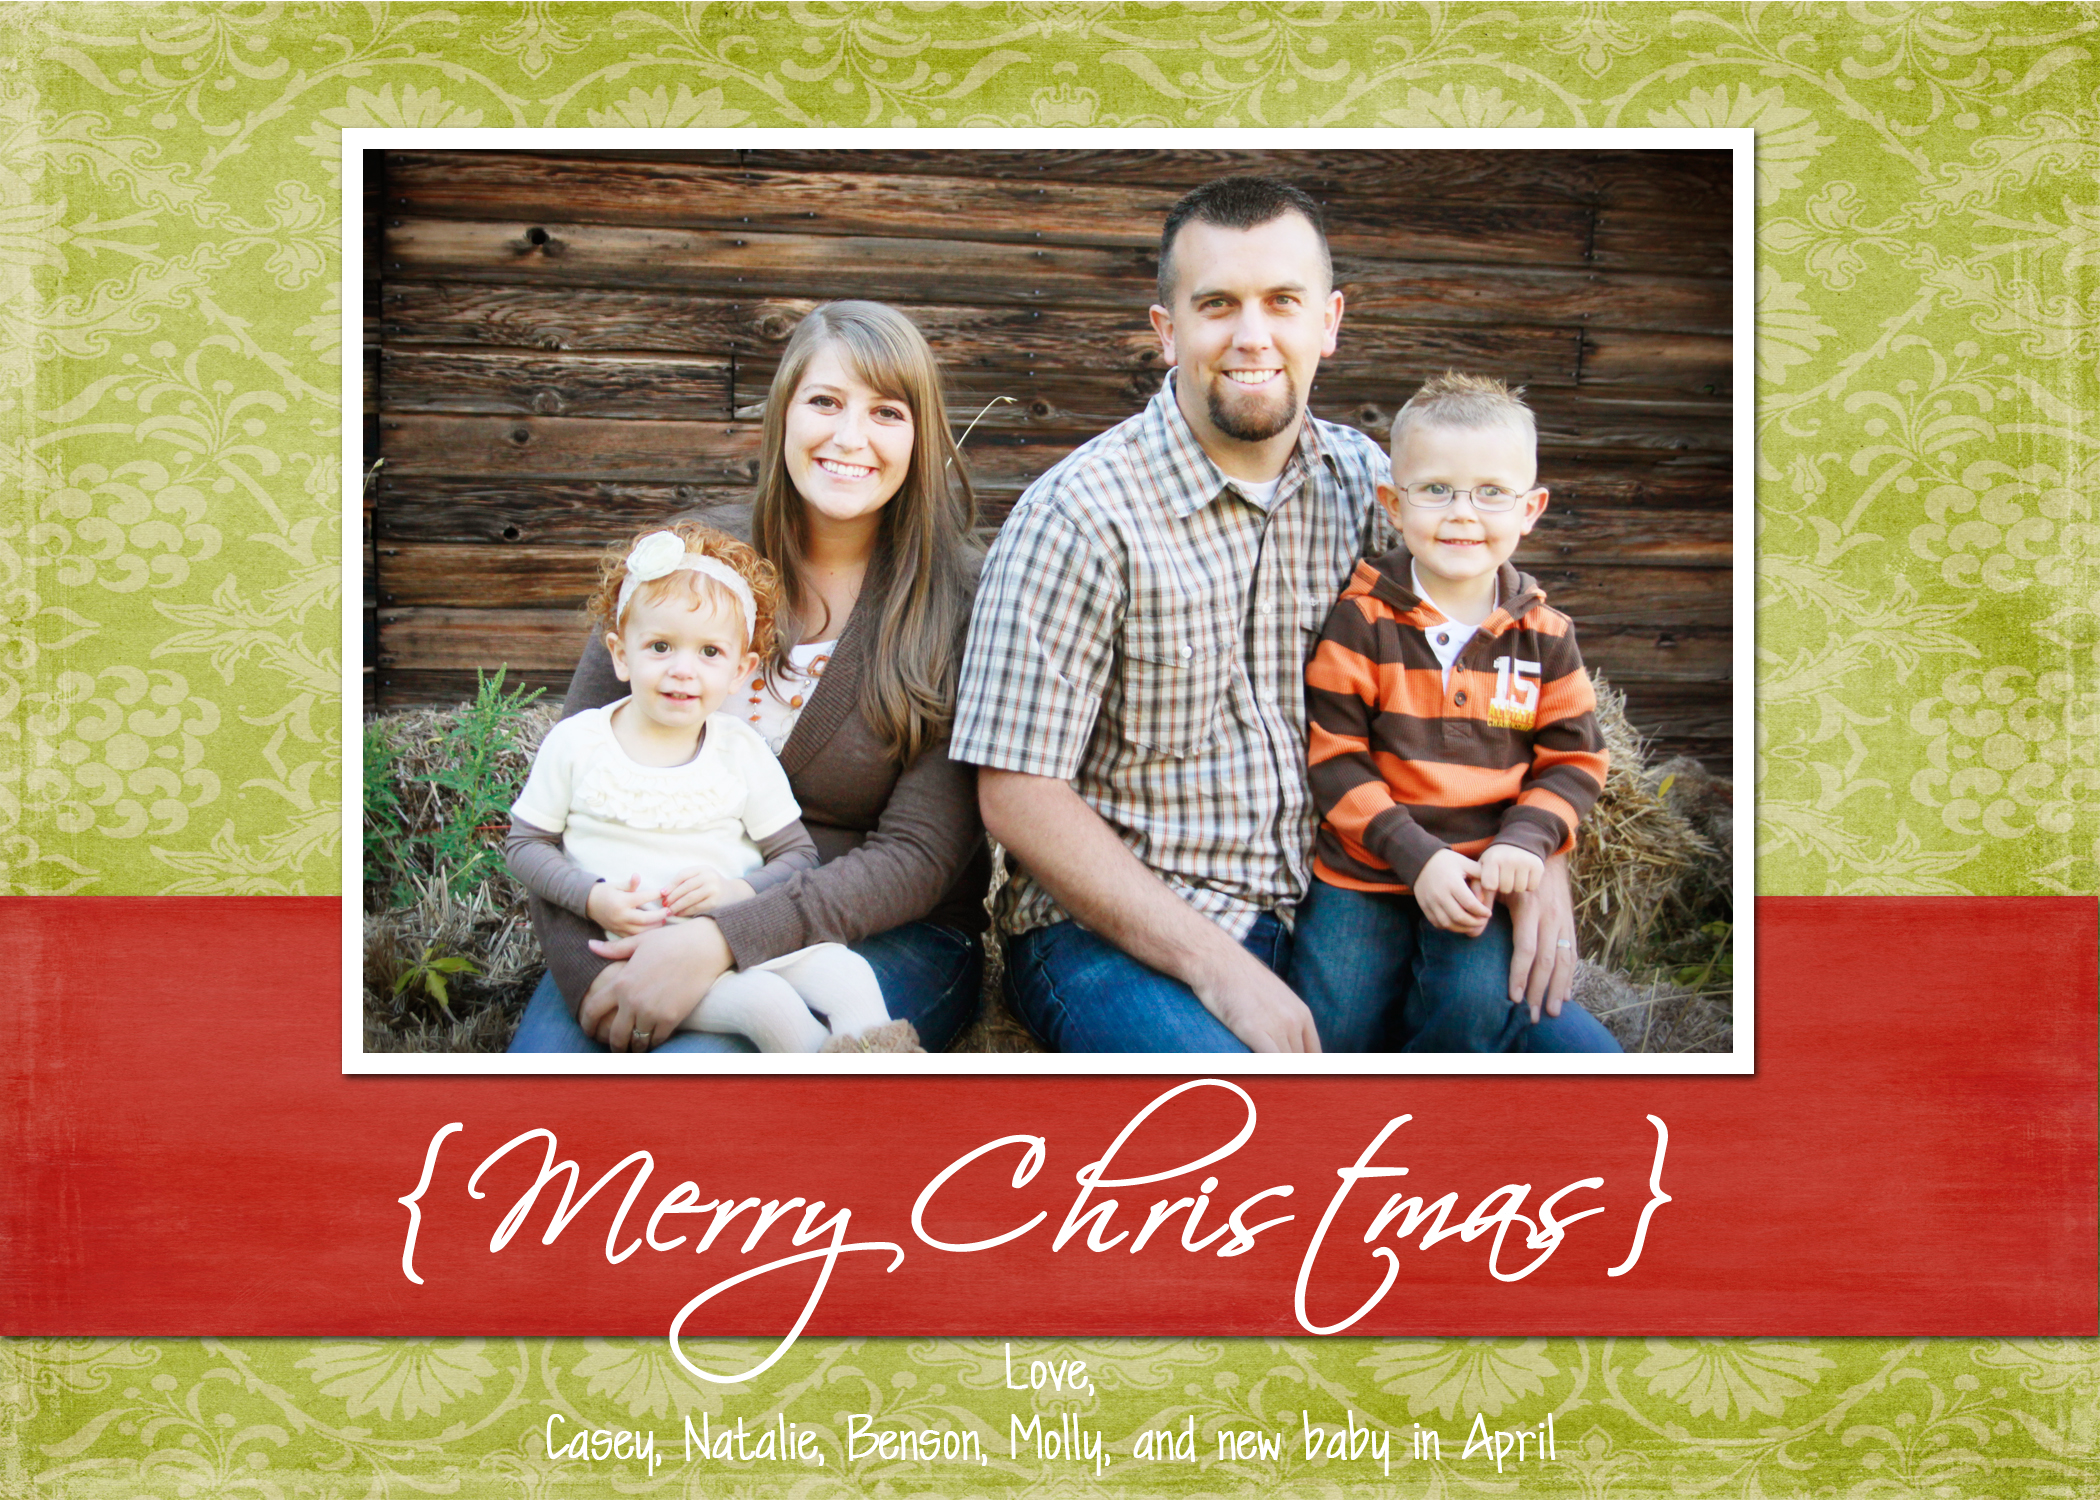 Christmas Card Templates Free Download - The Creative Mom In Free Christmas Card Templates For Photoshop